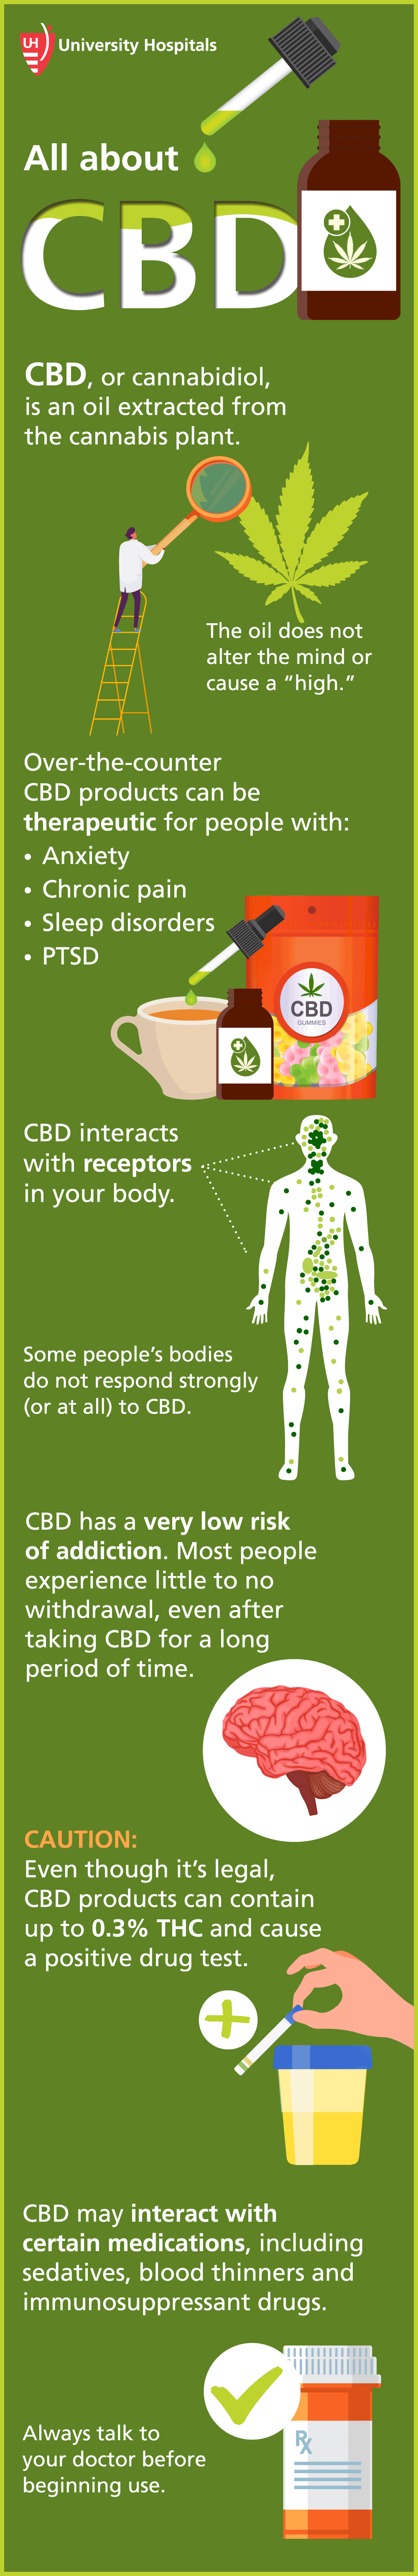 Infographic: All About CBD, an oil extracted from the cannabis plant